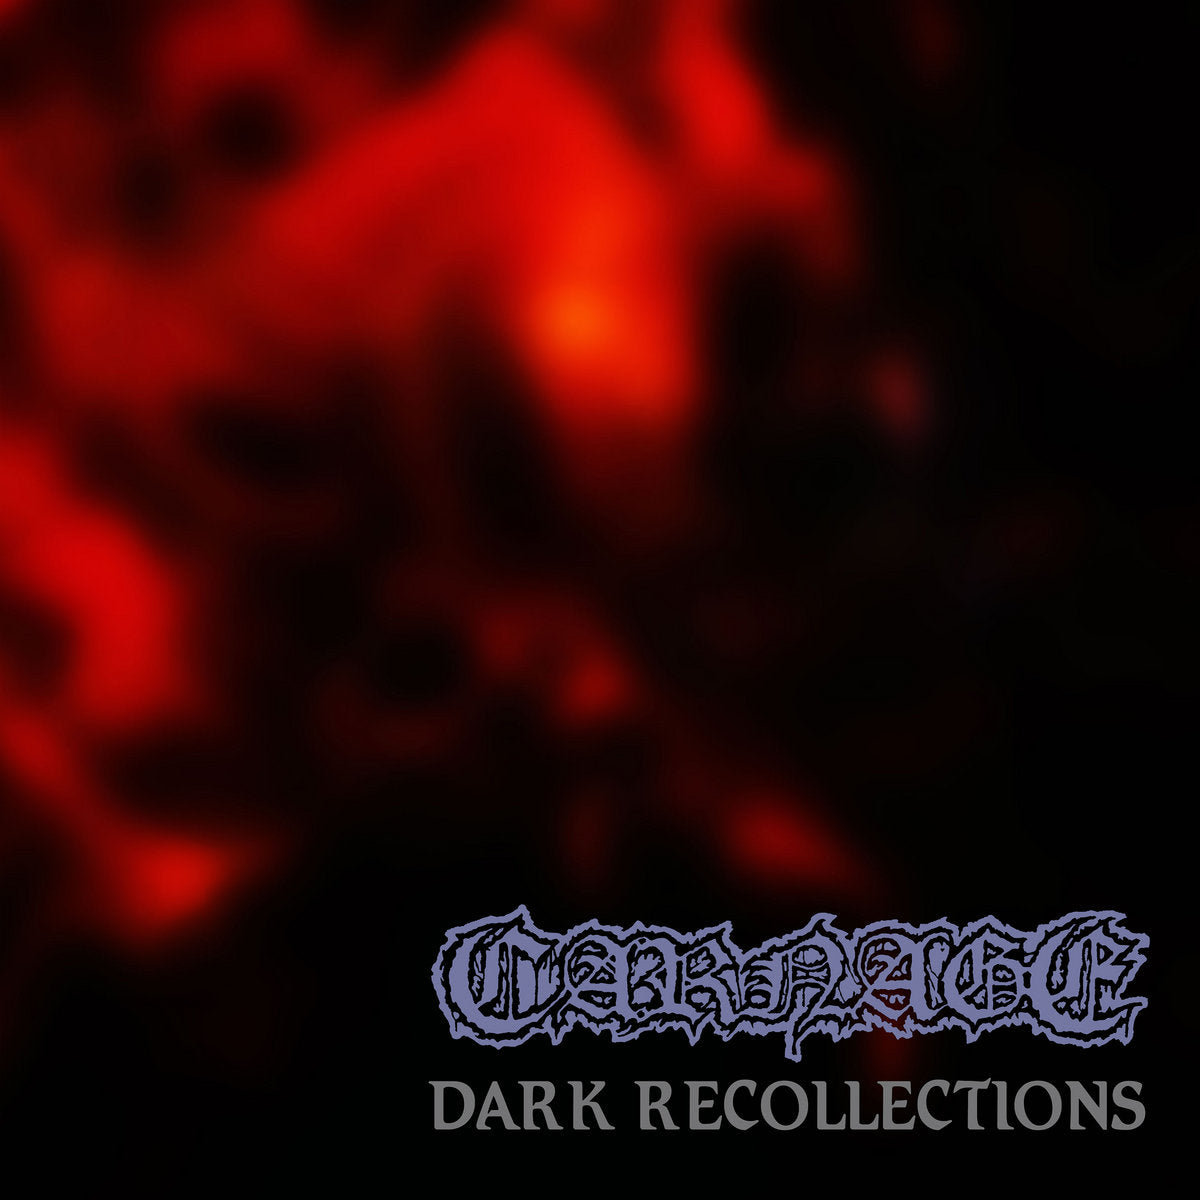 Carnage "Dark Recollections" Digital Download